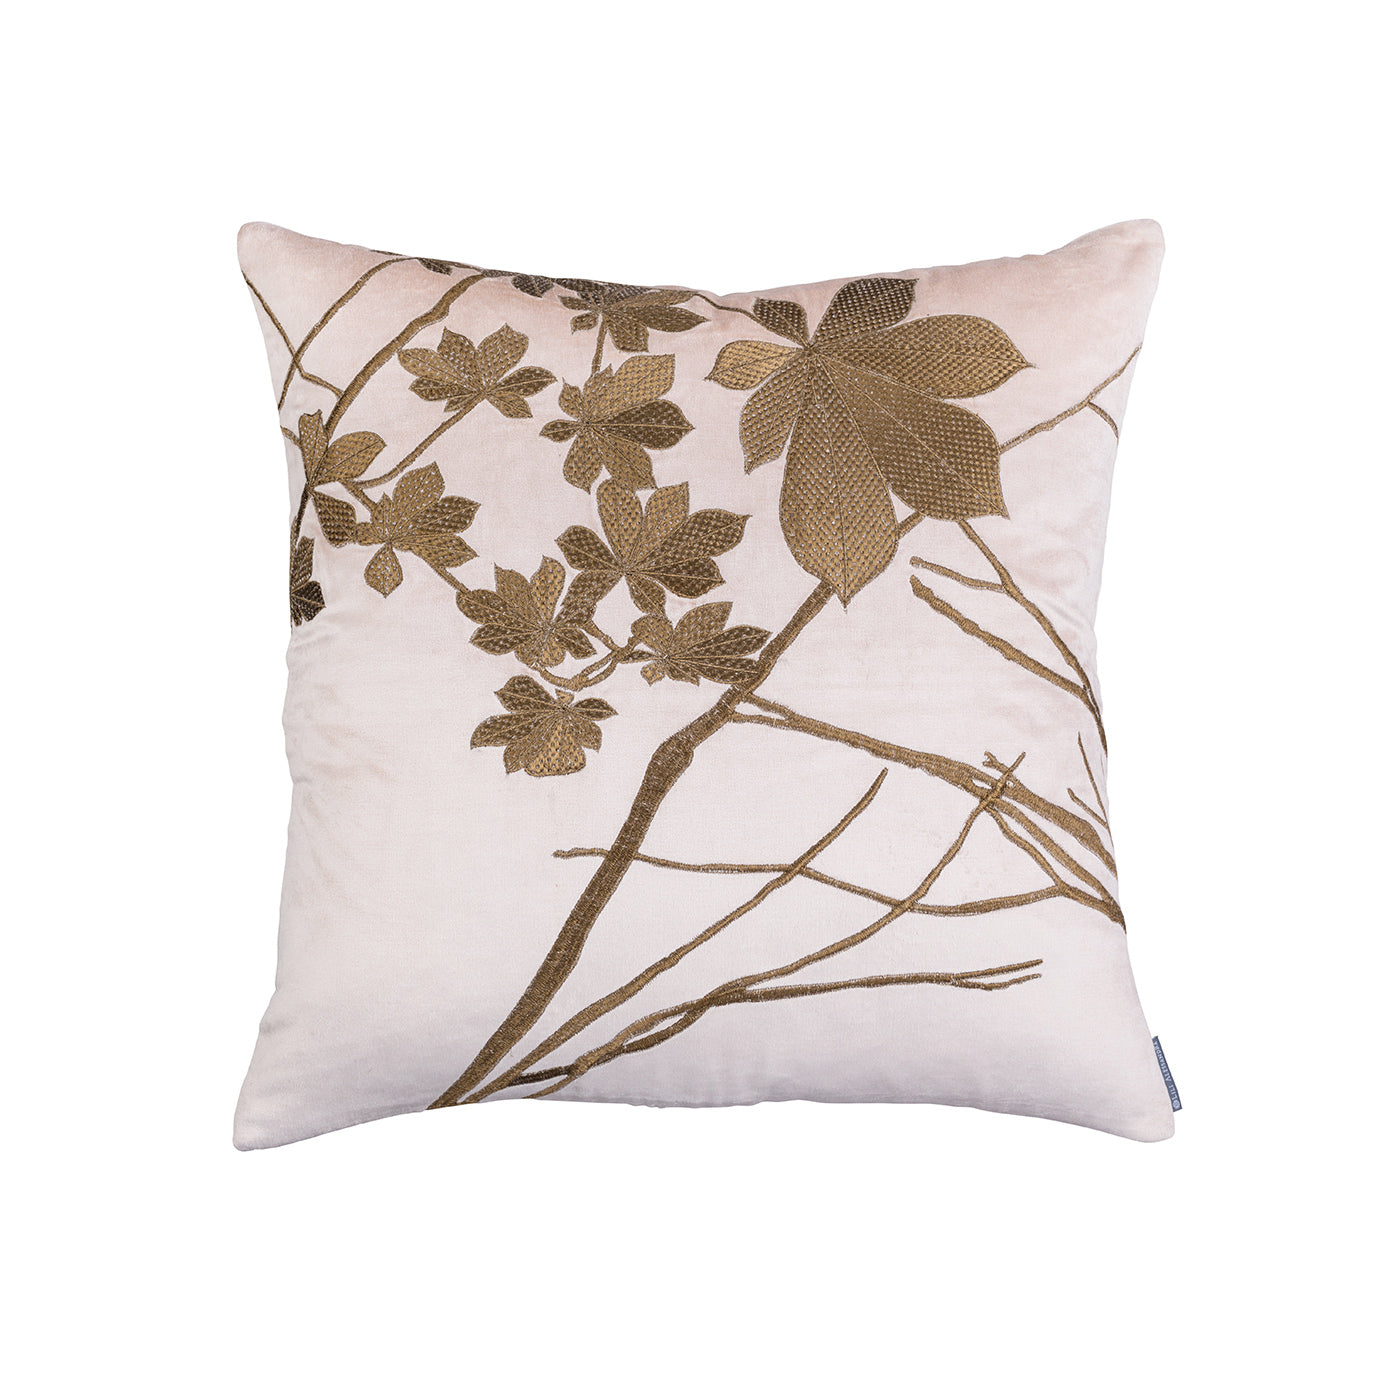 Leaf Decorative Pillow Blush Velvet With Gold Basketweave And Antique Gold Machine Embroidery 24X24